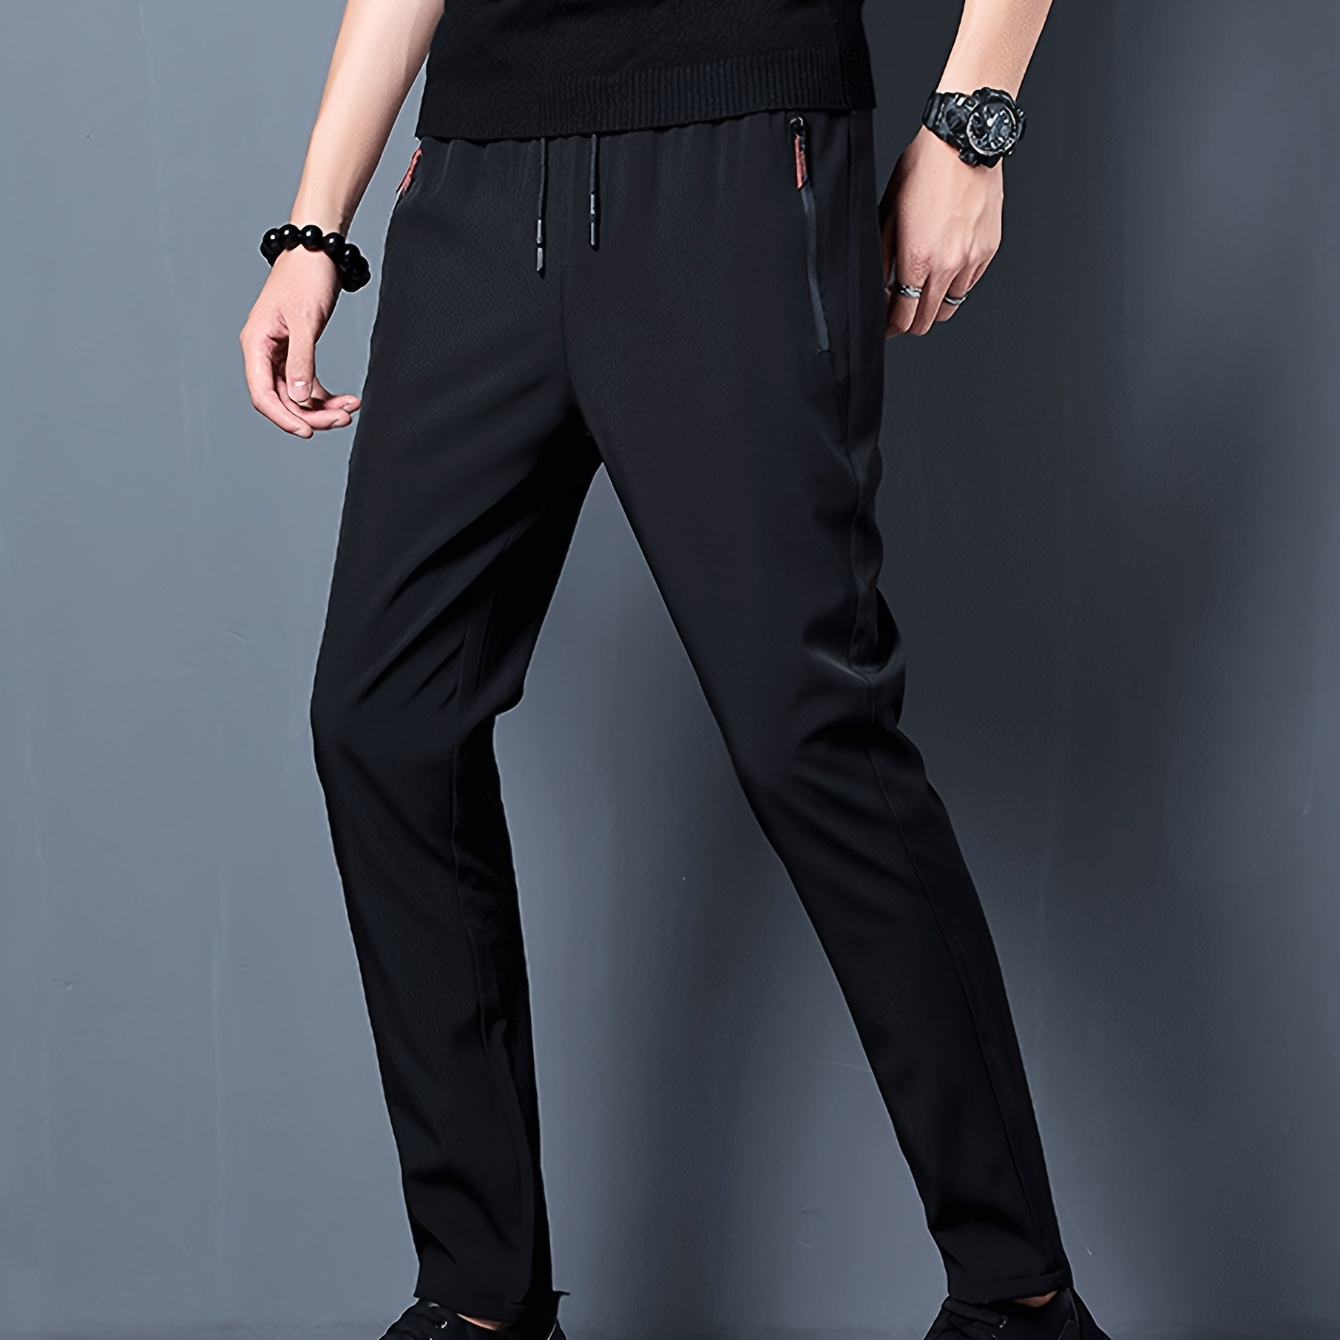 

Men's Solid Track Pants With Zipper Pockets, Casual Drawstring Pants For Outdoor Activities Gift